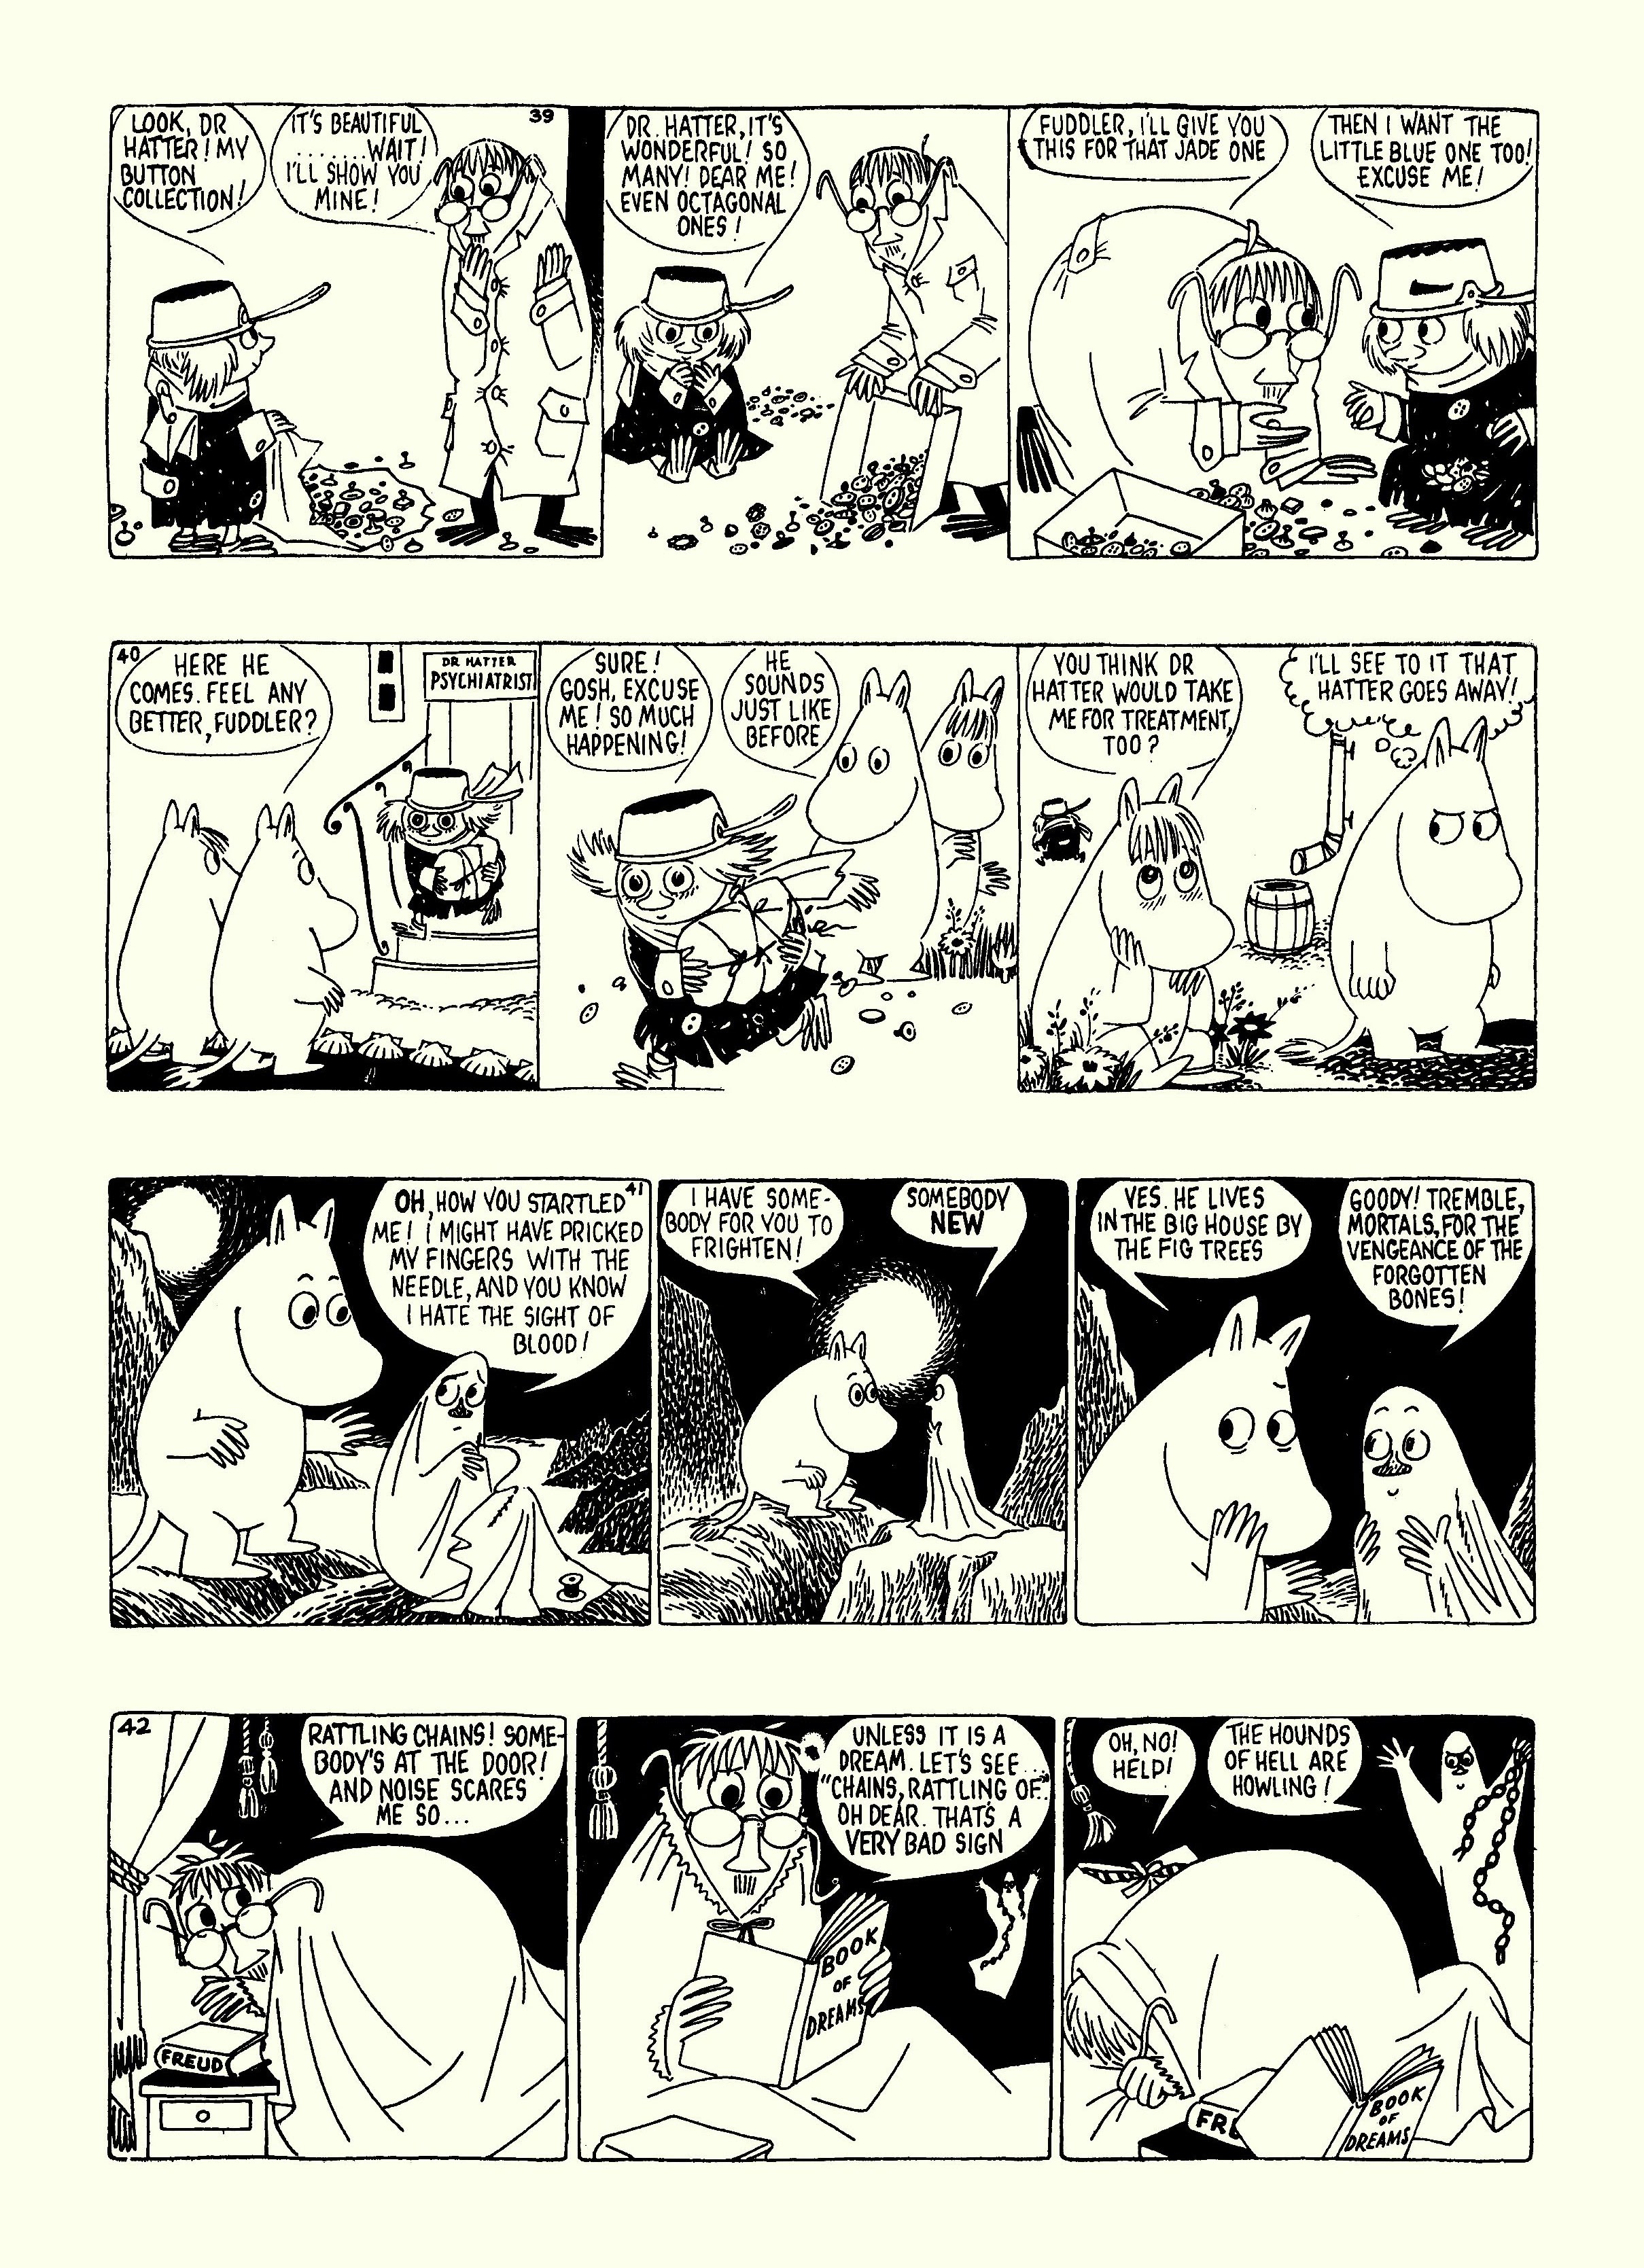 Read online Moomin: The Complete Tove Jansson Comic Strip comic -  Issue # TPB 5 - 67